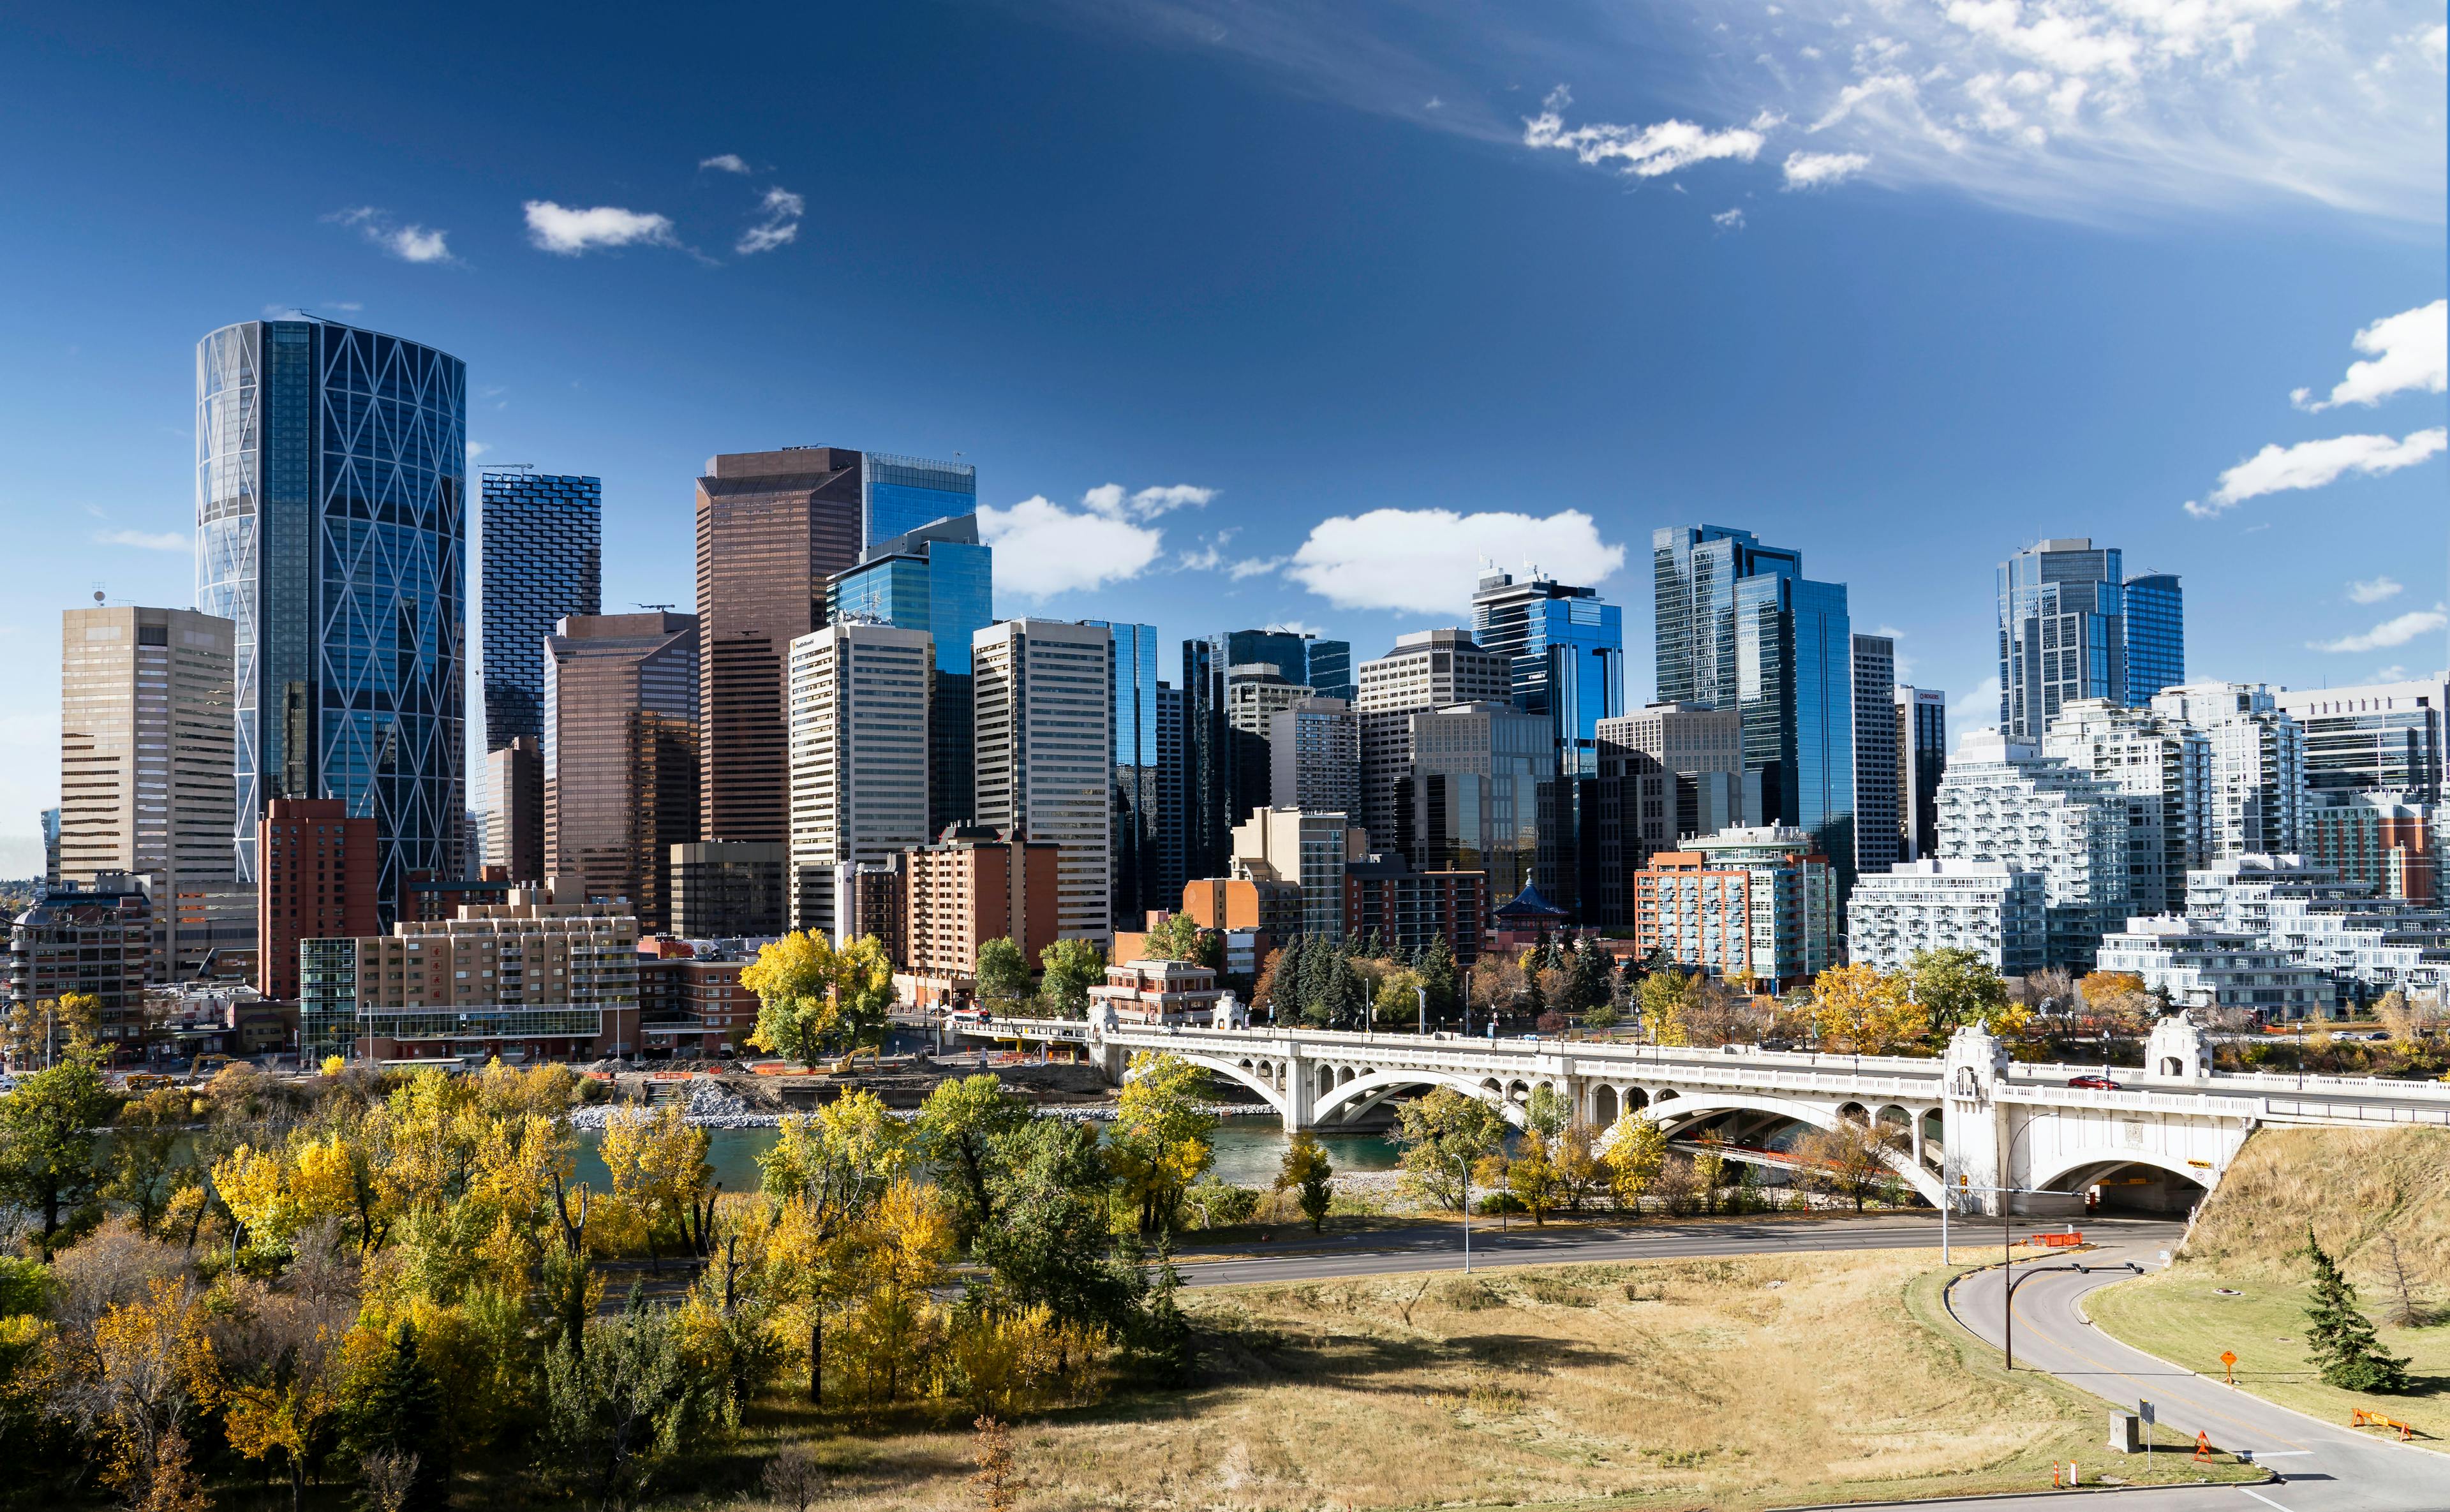 Downtown Calgary skyline in fall colours with office buildings and popular landmarks including the Center street Bridge and Riley park in Alberta